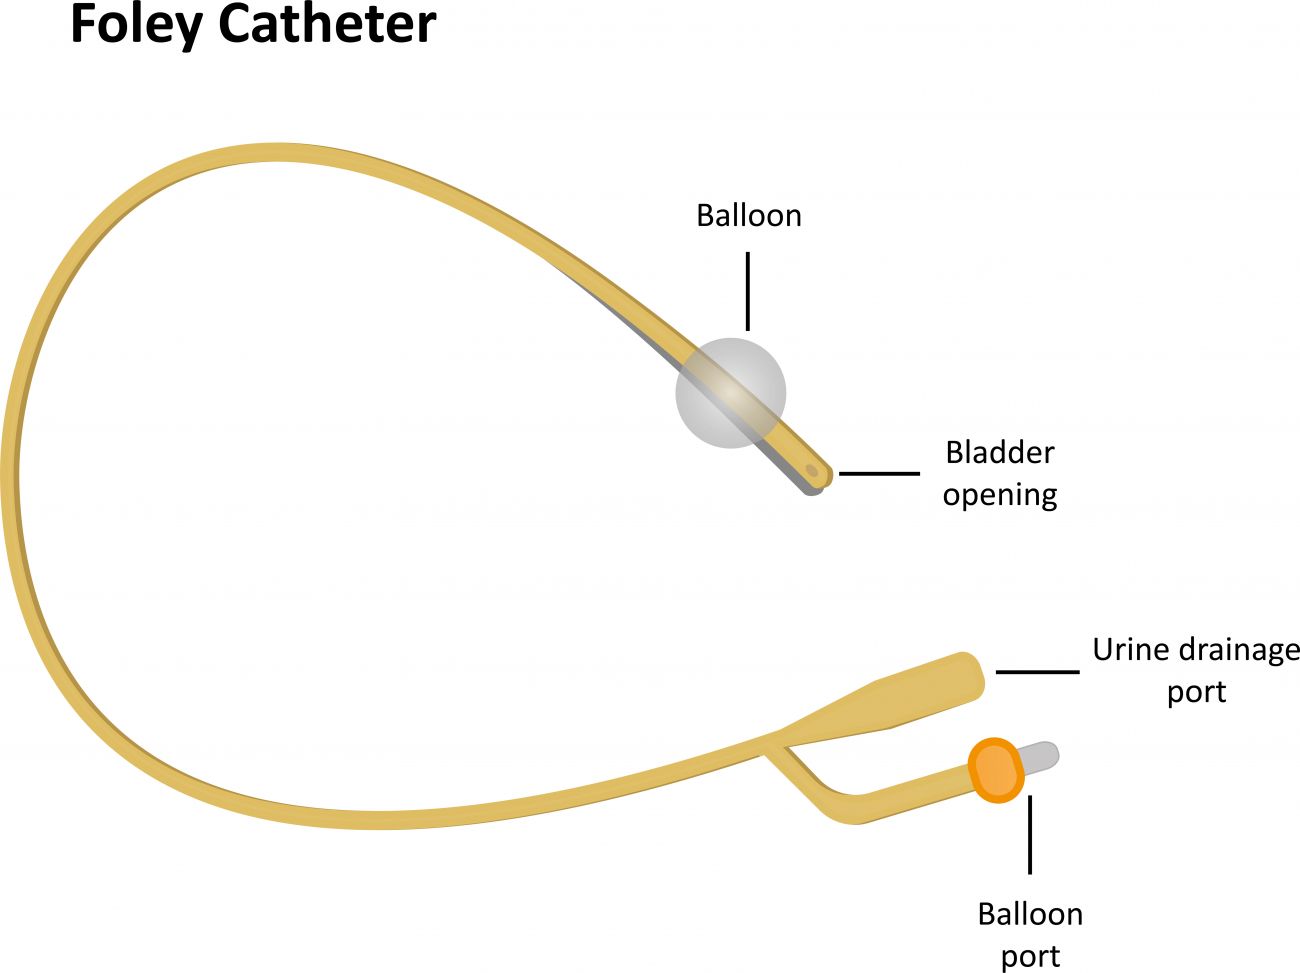 Illustration shows the parts of a Foley catheter